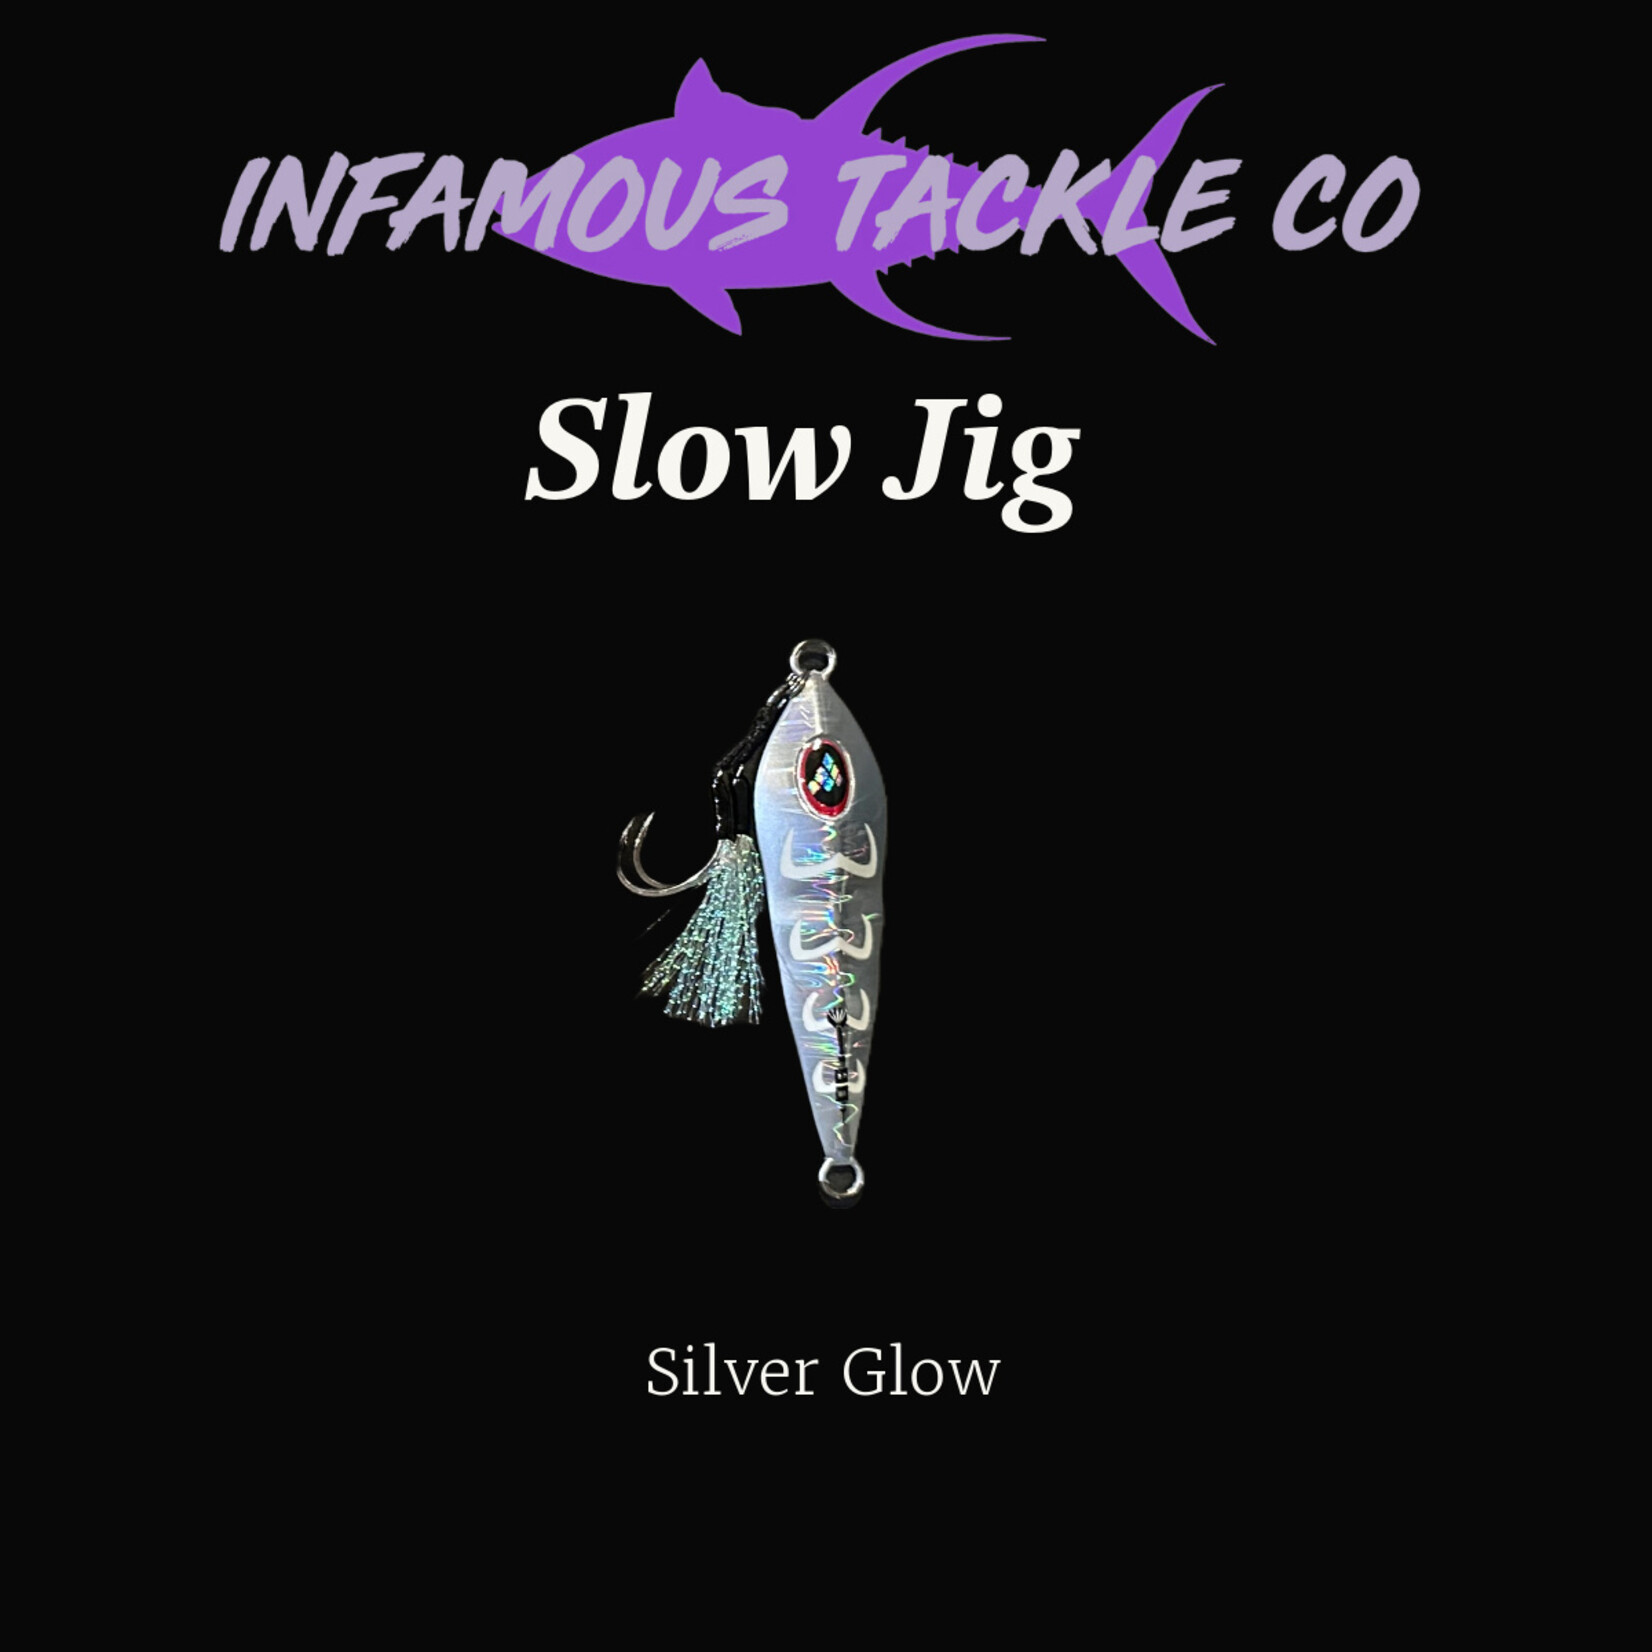 Infamous Tackle Co. Slow Jig